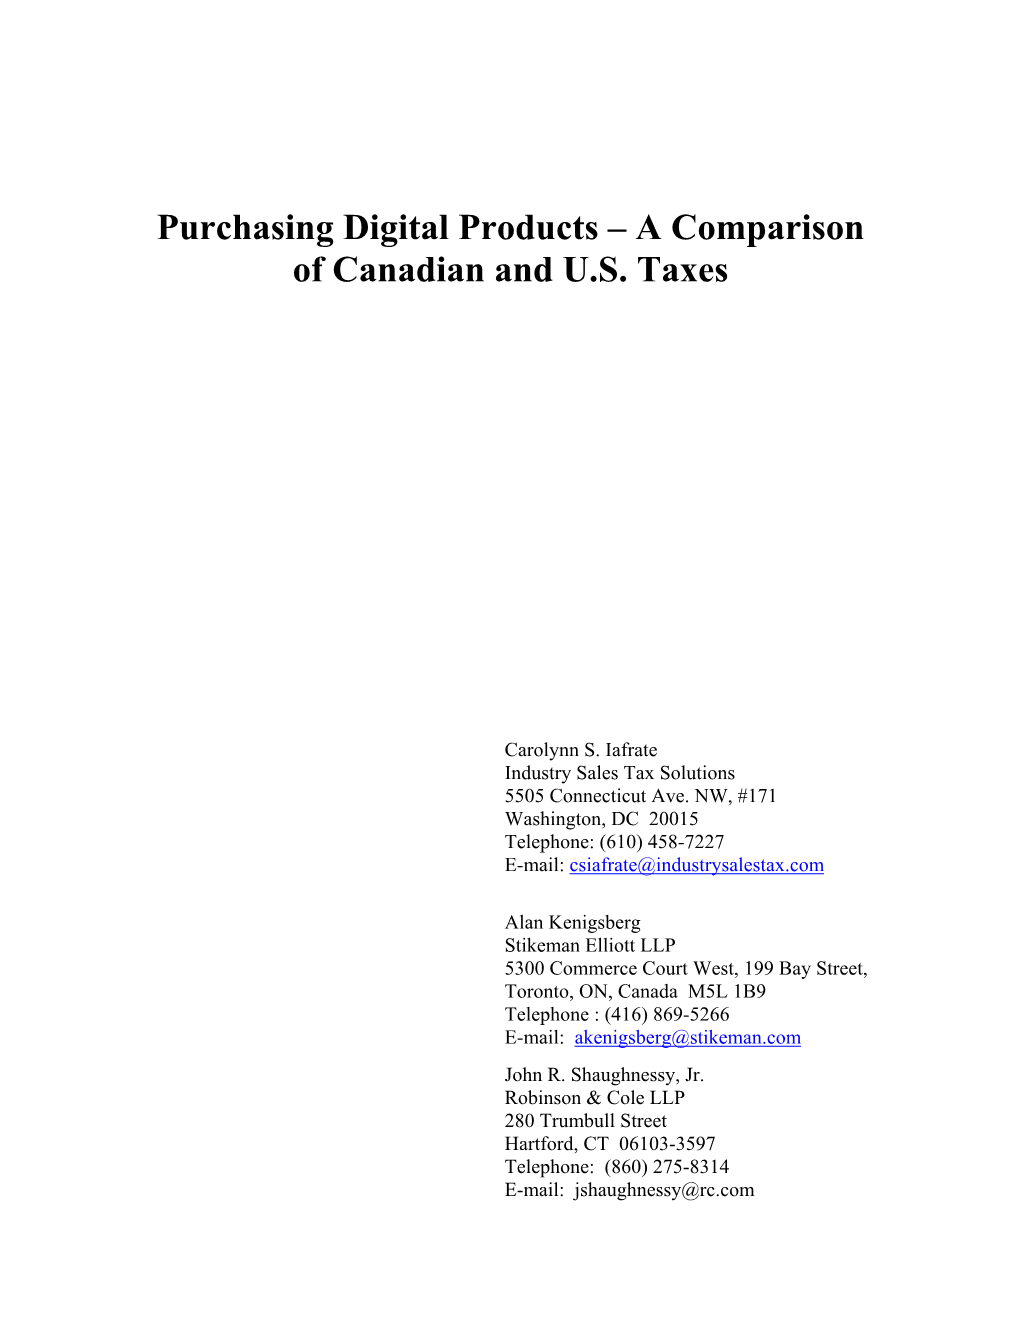 Purchasing Digital Products – a Comparison of Canadian and U.S. Taxes